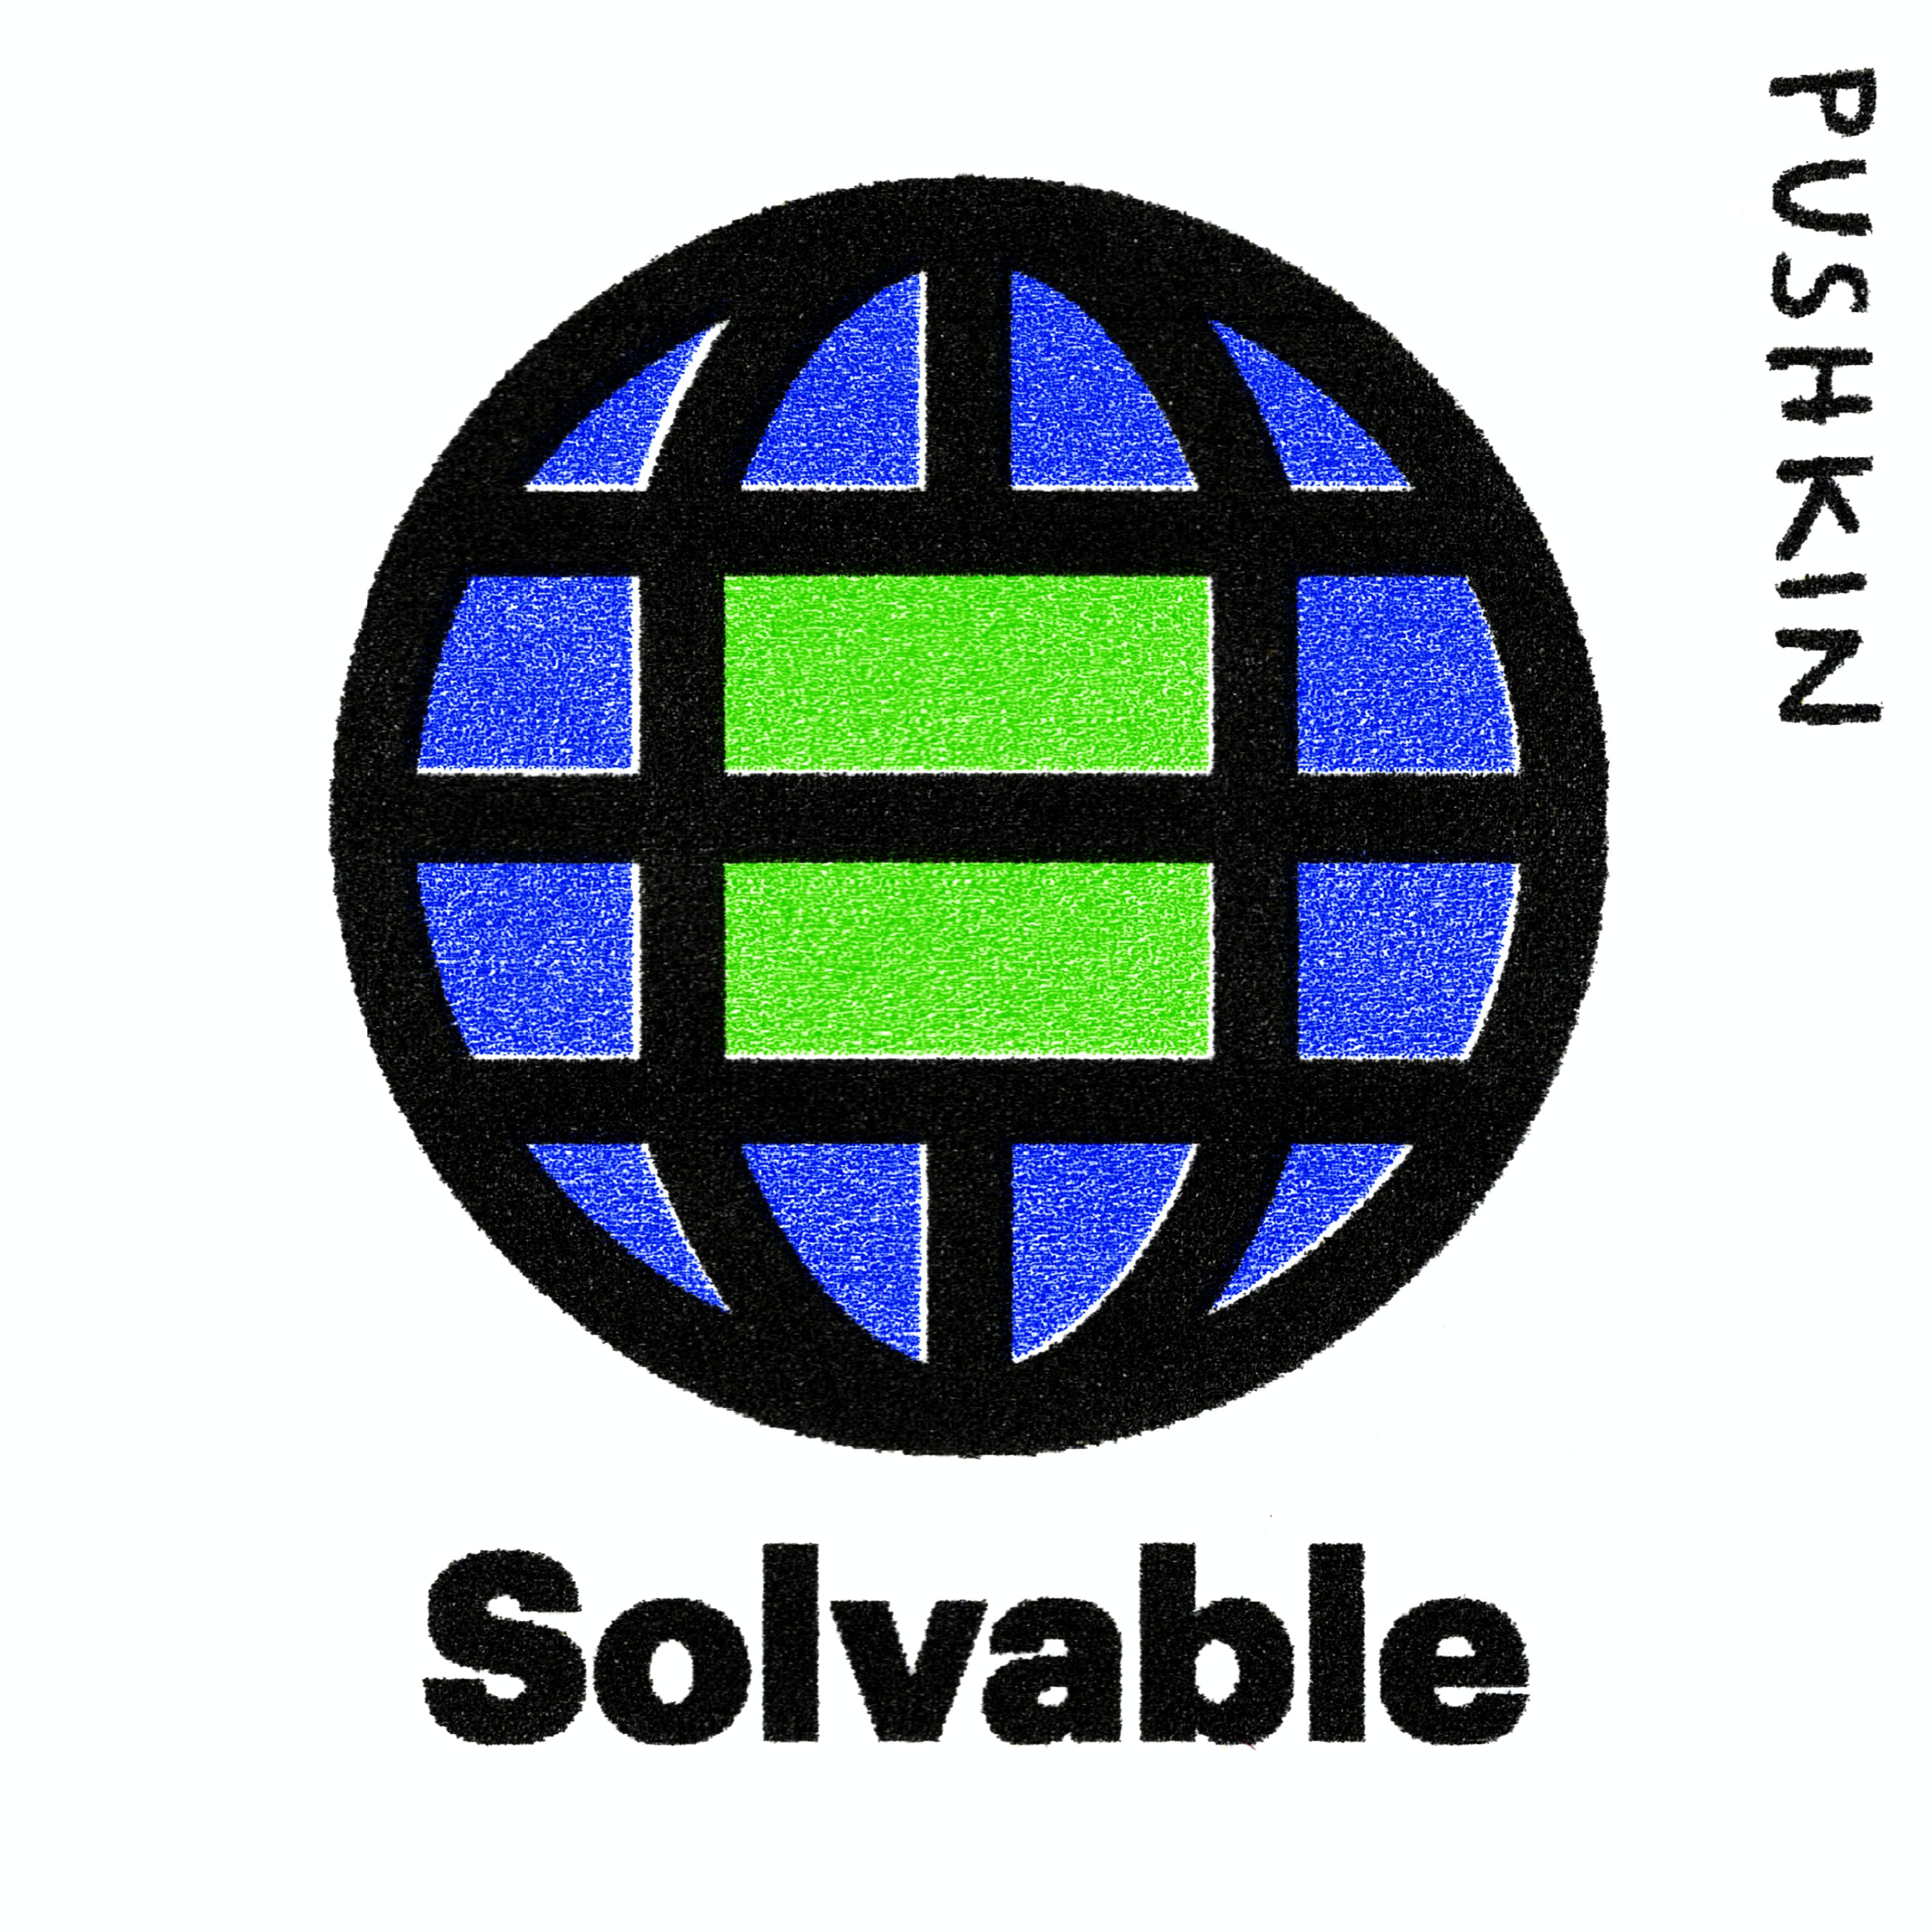 Introducing: Solvable